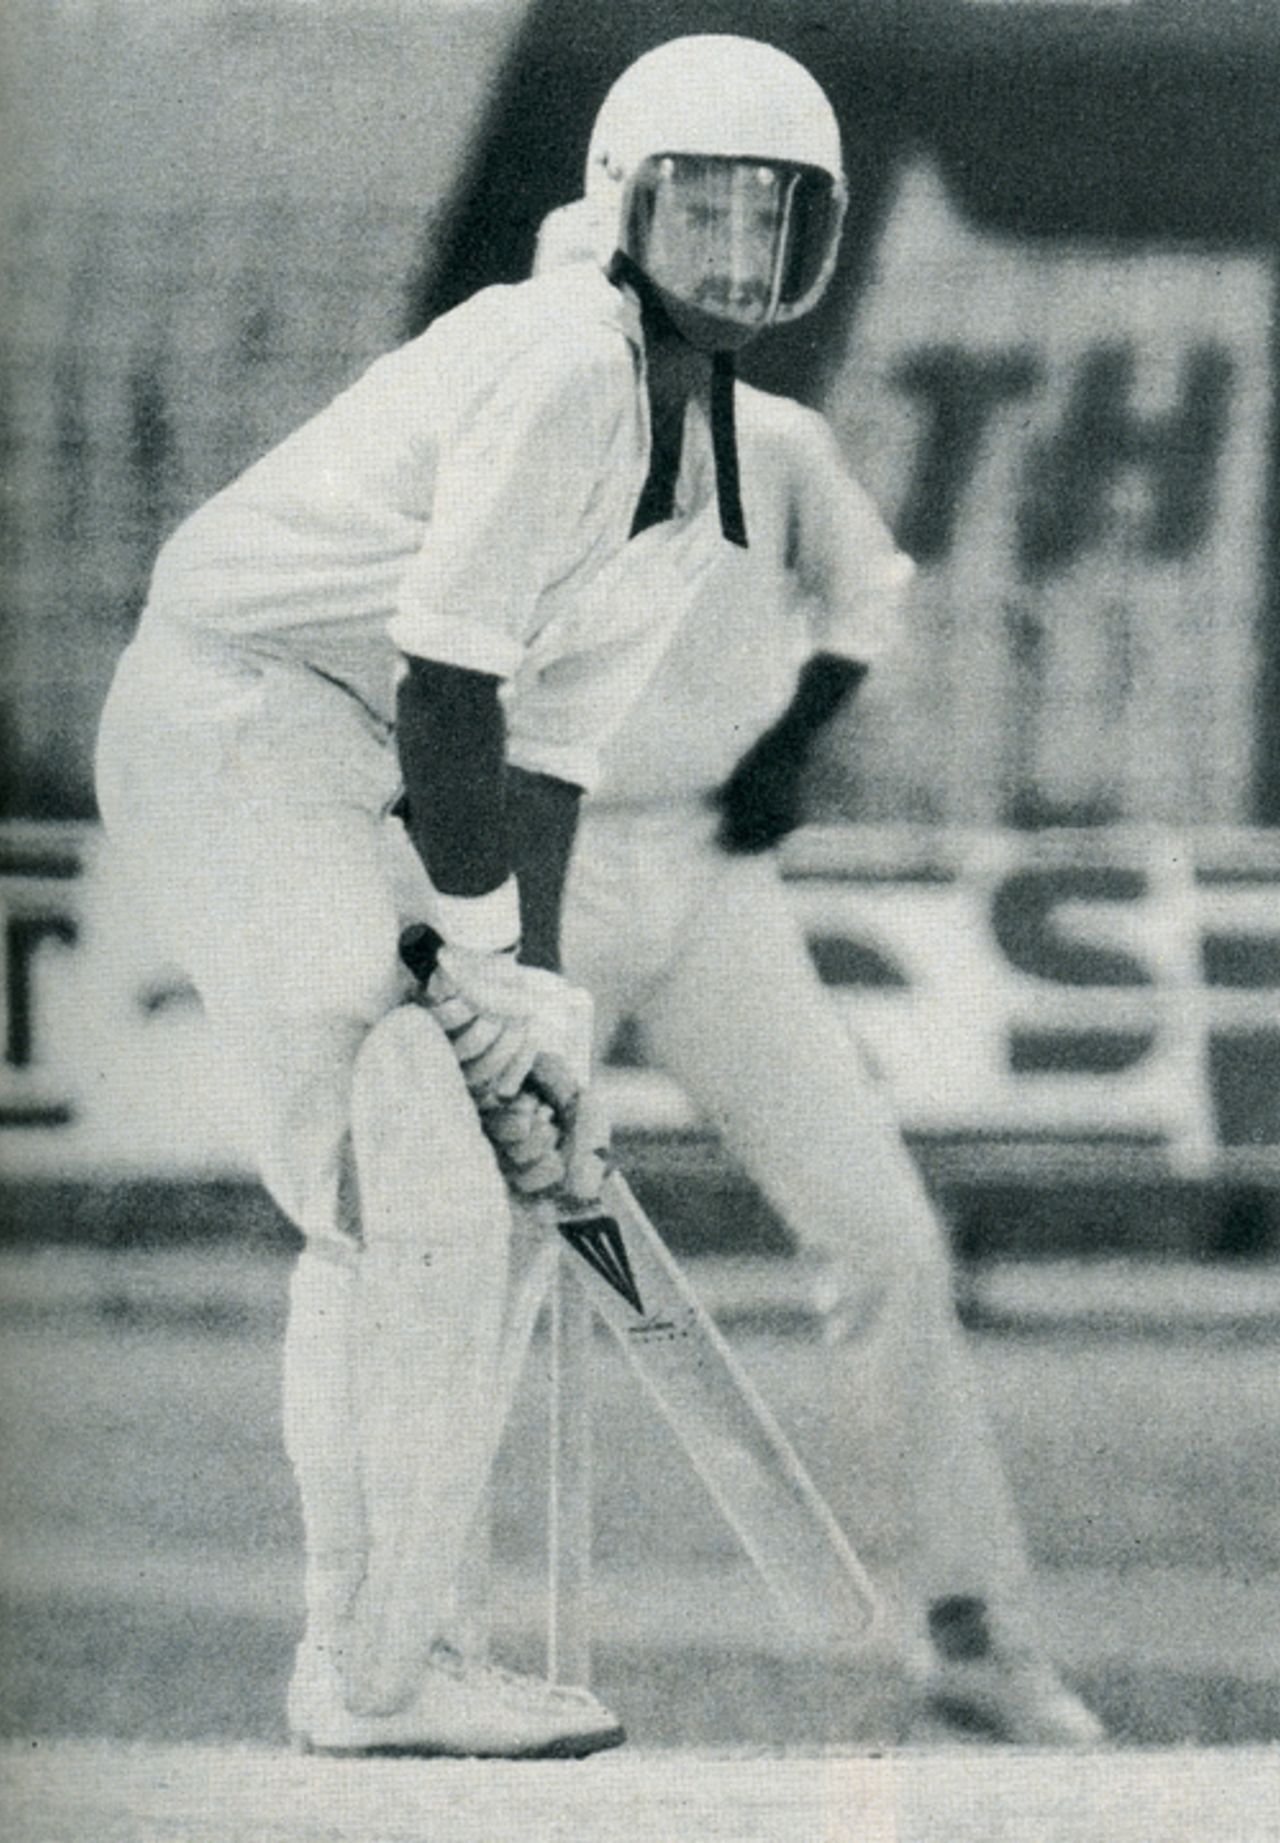 Graham Yallop takes guard in a helmet, the first man to wear one in a Test. He was roundly booed by the crowd, West Indies v Australia, 2nd Test, Barbados, March 17, 1978